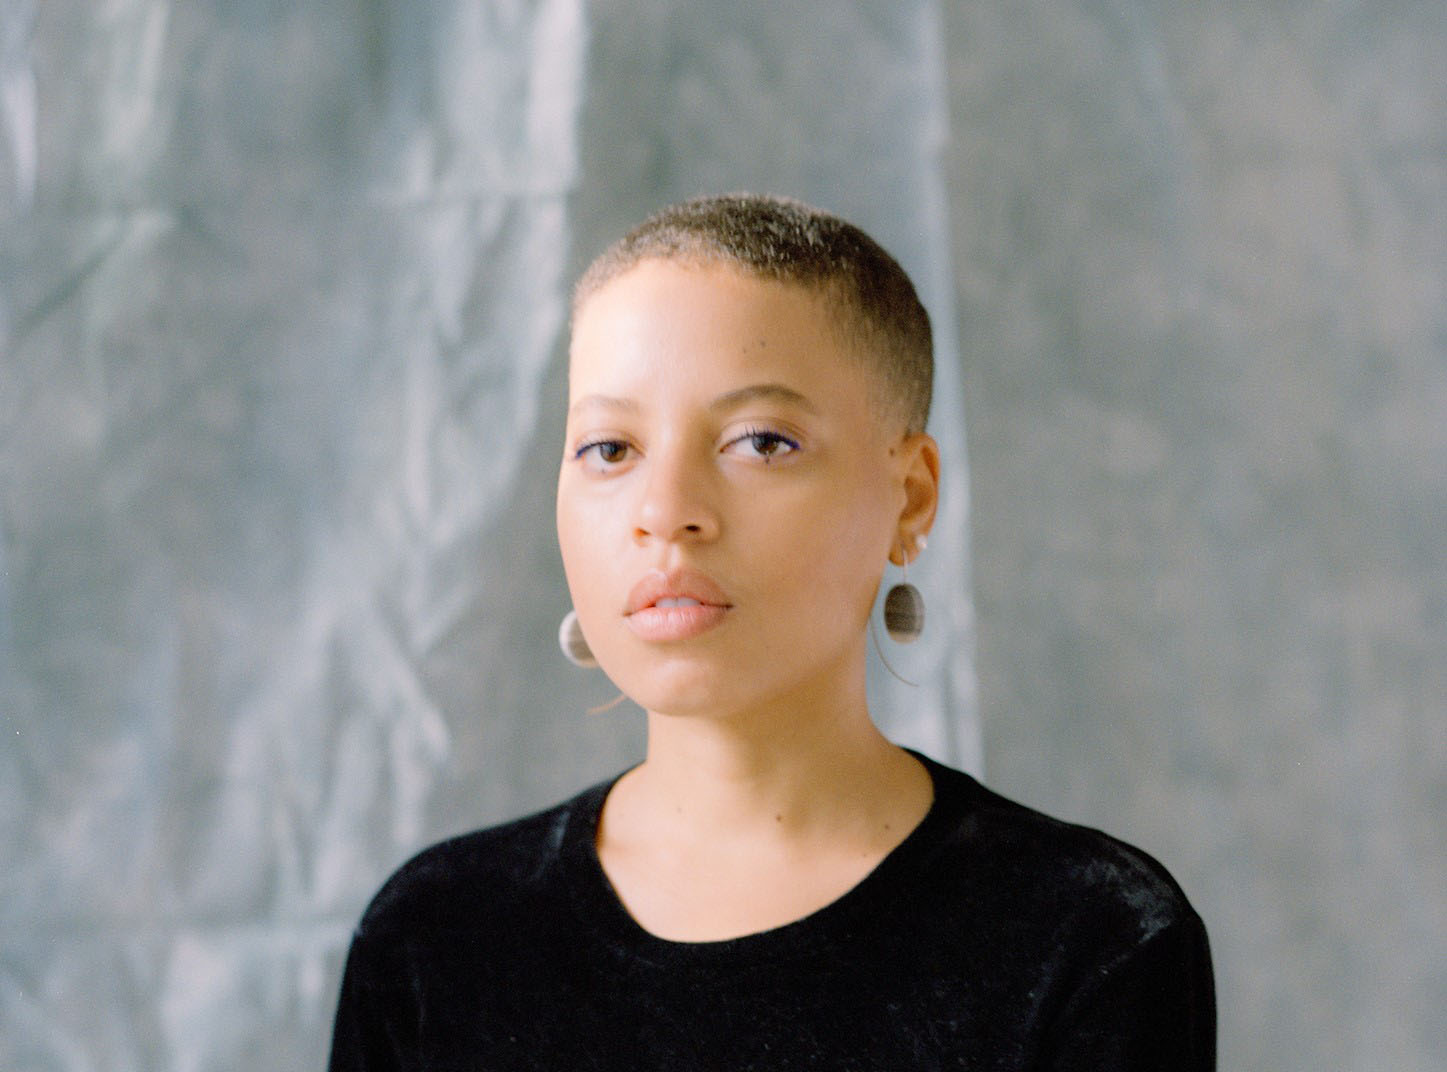 Photograph of Naima Green, a Black woman with short cropped hair, gazing softly into — almost through — the camera. She wears a black velour top, big stone earrings, and light eye makeup.